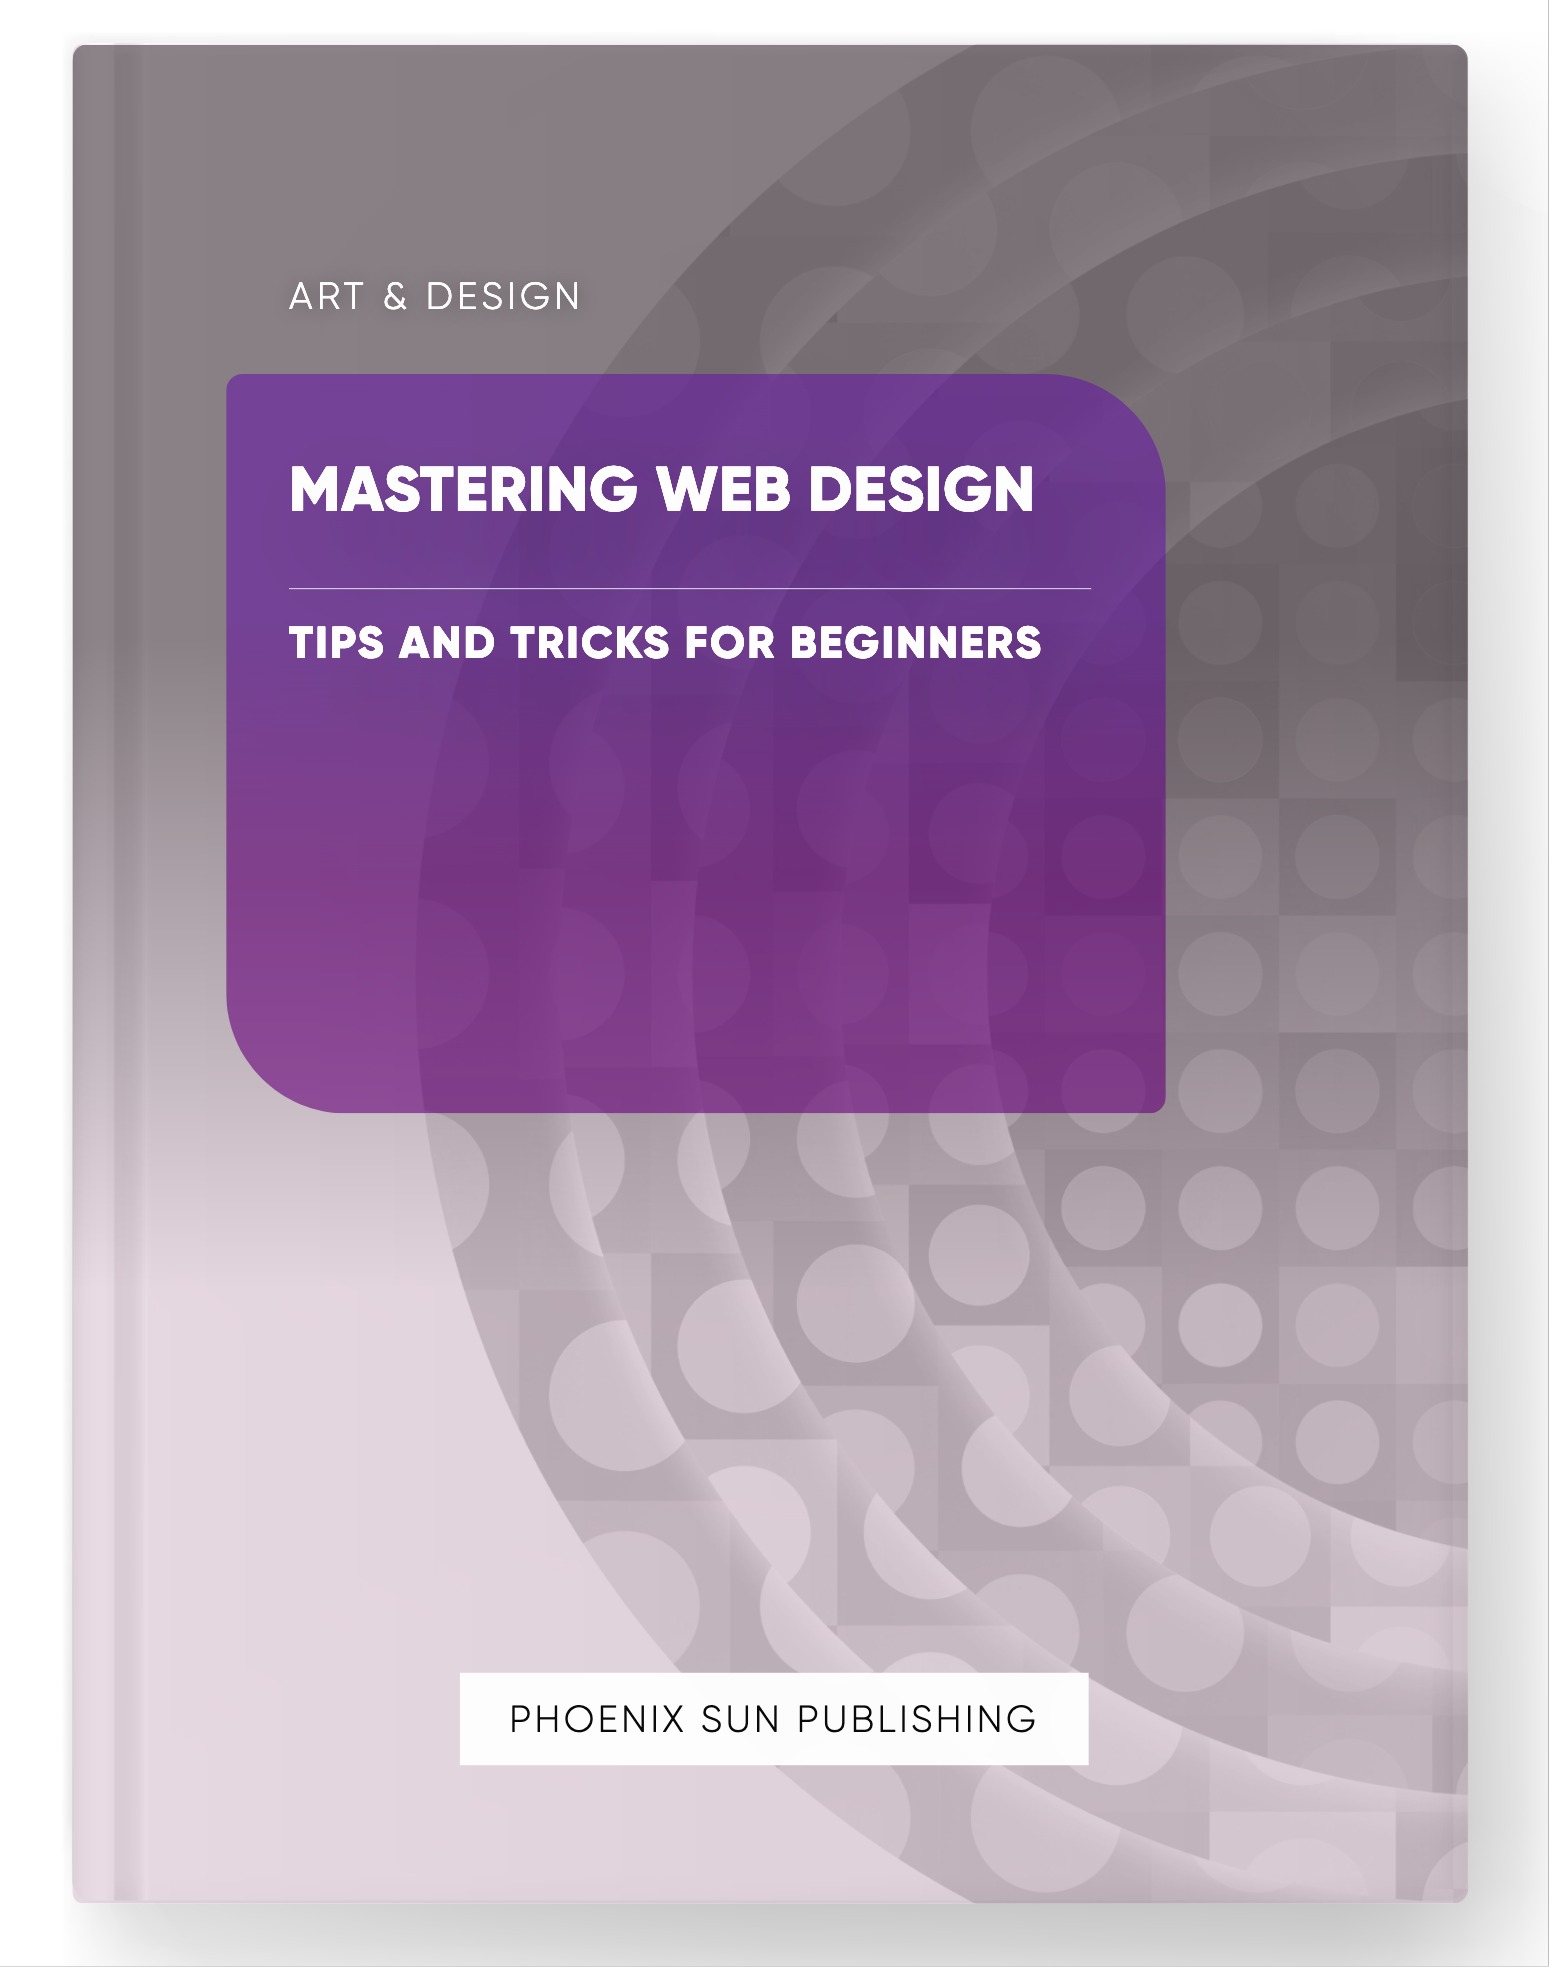 Mastering Web Design – Tips and Tricks for Beginners